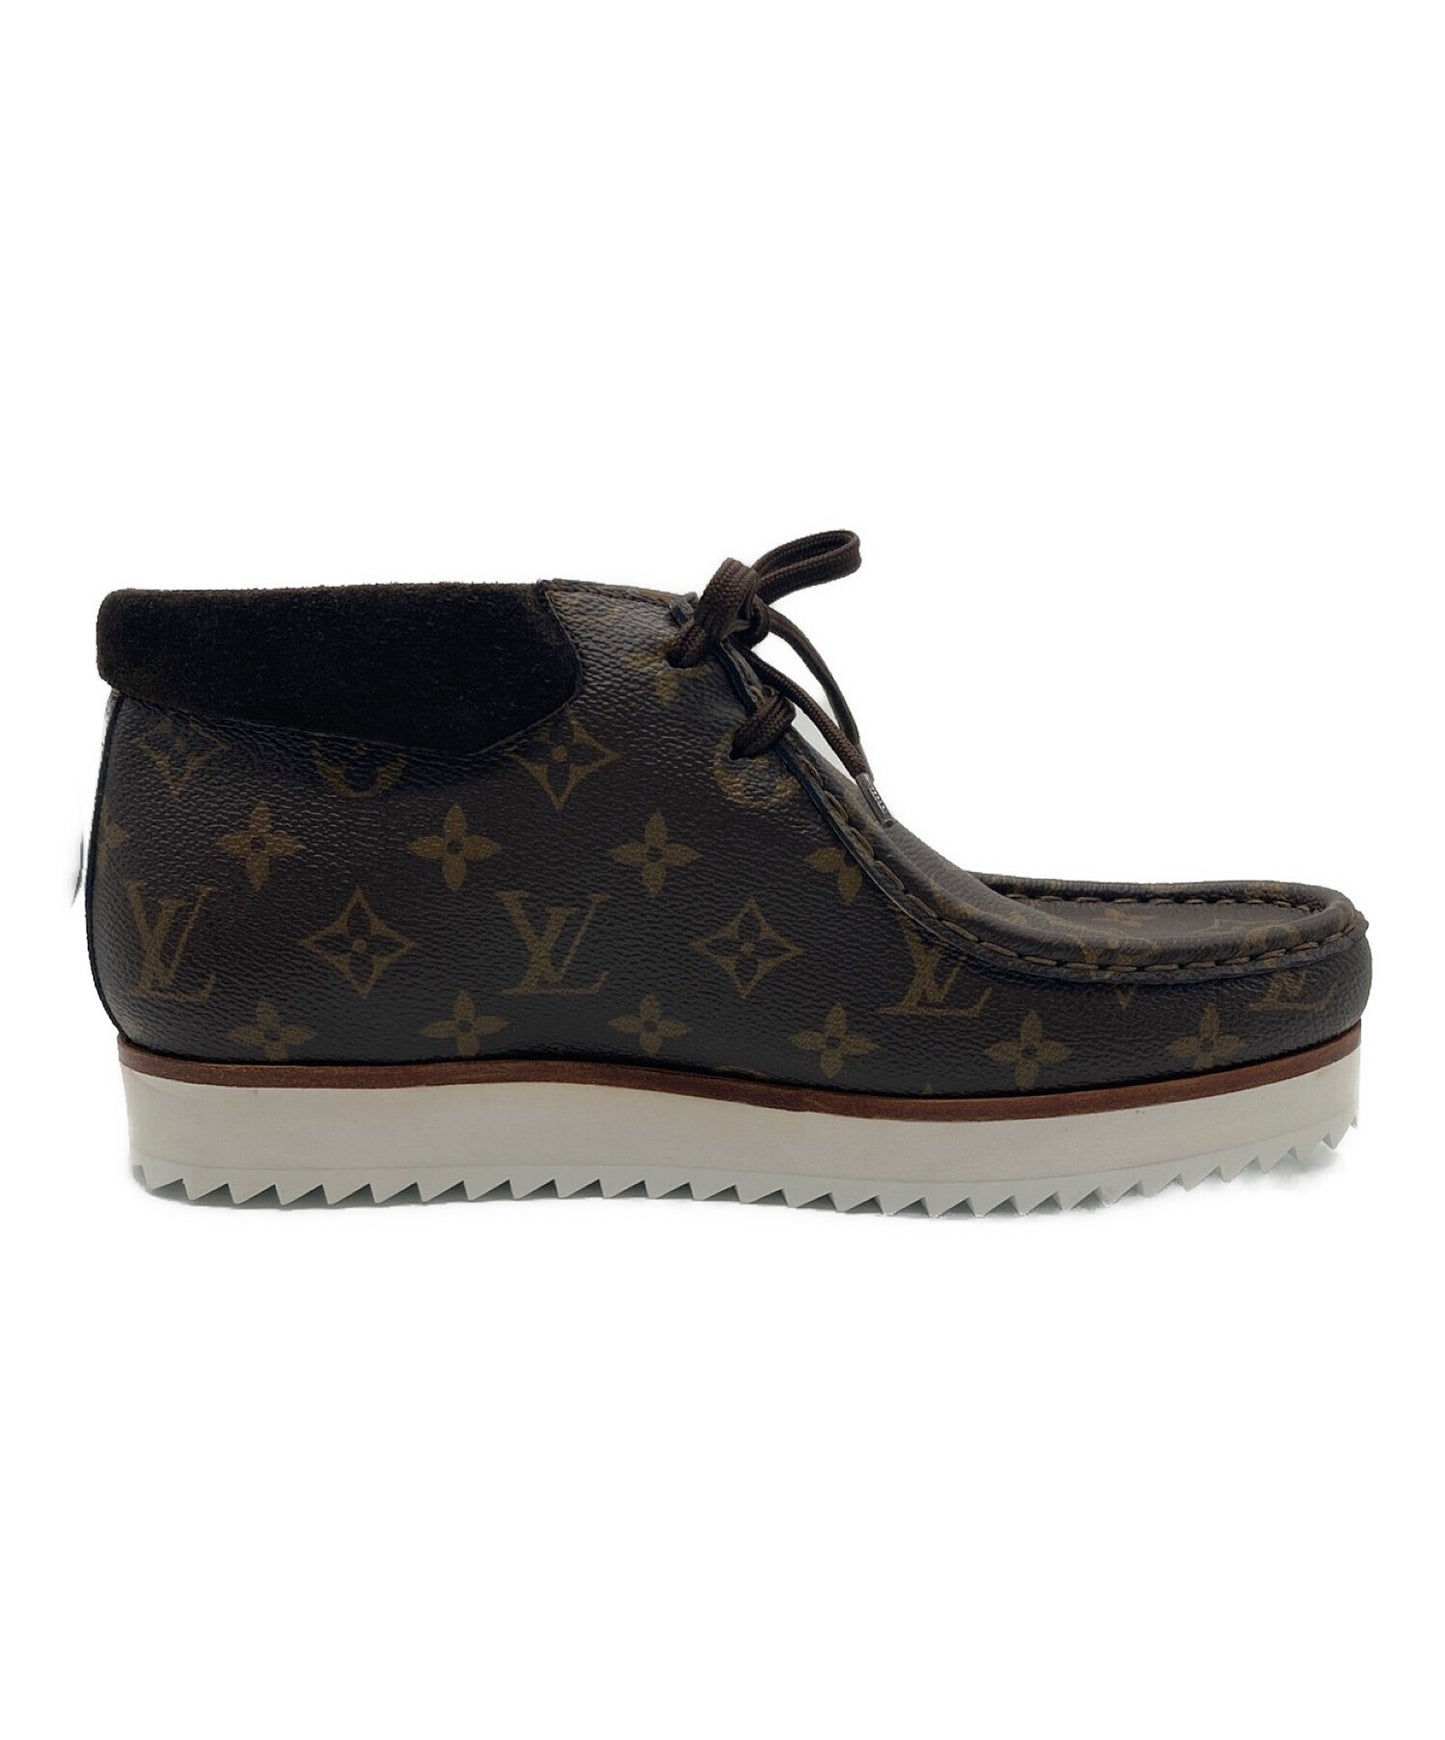 Buy Louis Vuitton 20AW × NIGO LV Mod Line Monogram Chukka Boots Brown Nigo  1A81EA 5 Brown from Japan - Buy authentic Plus exclusive items from Japan